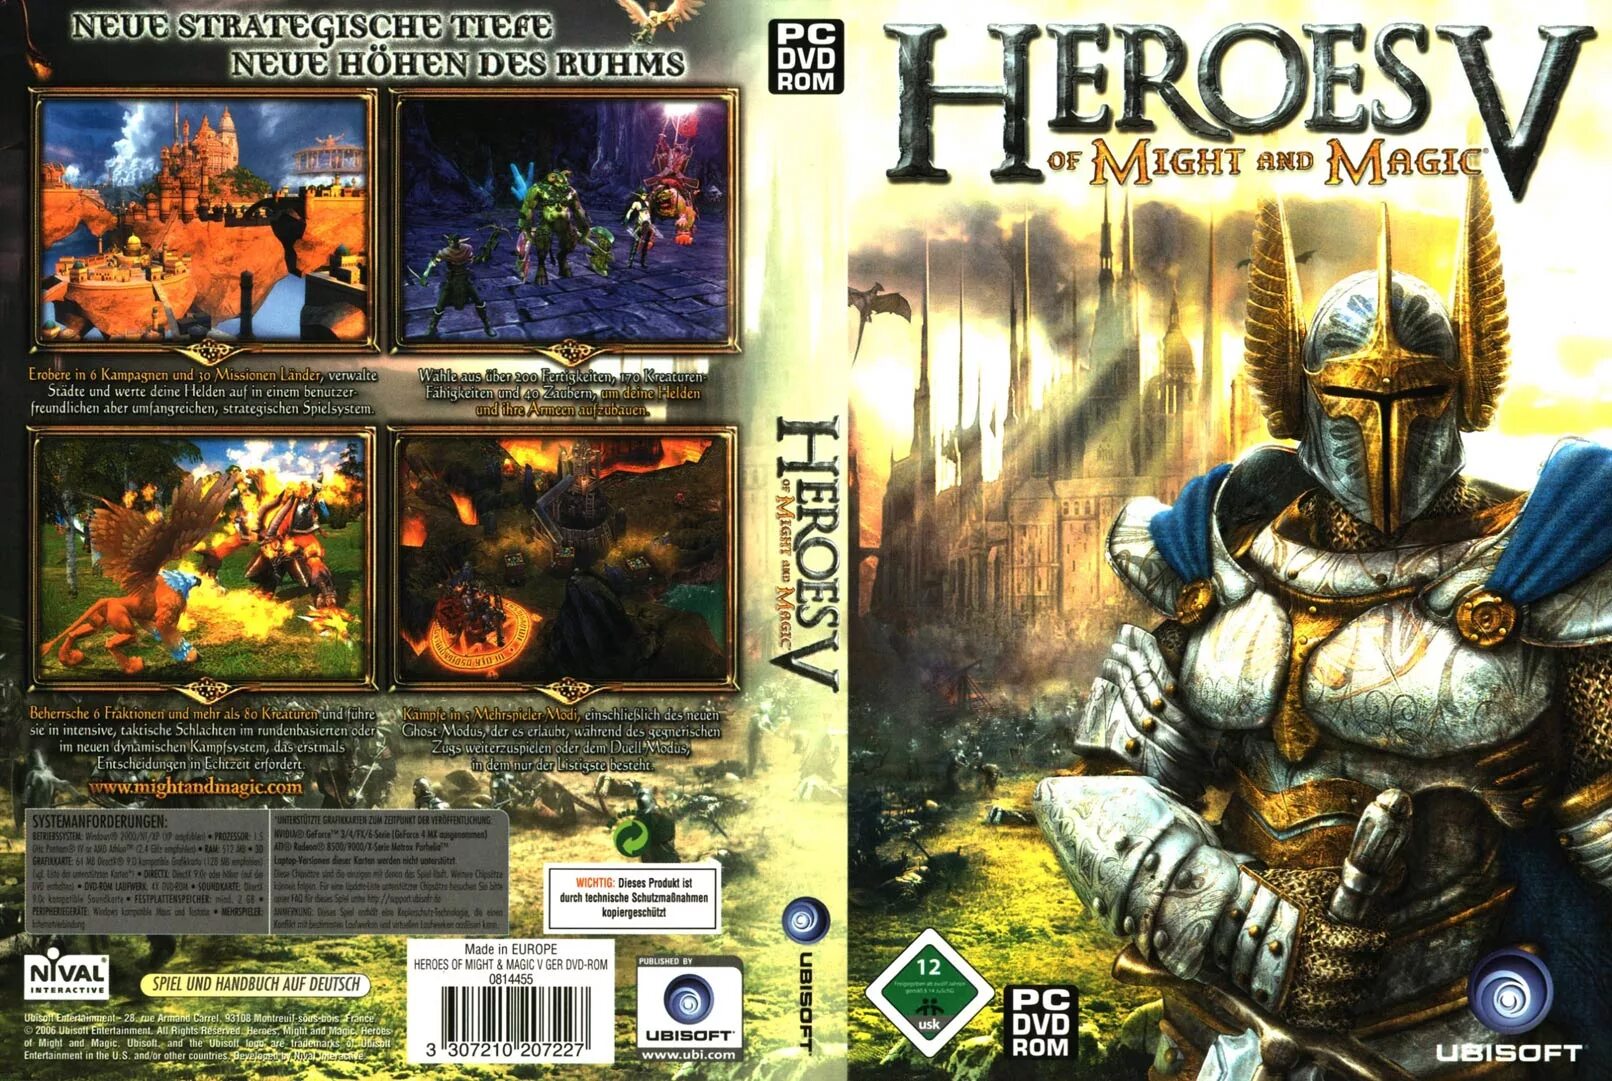 Heroes of might and Magic диск. Герои 5 Gold Edition диск. Heroes of might and Magic v диск. Герои 5 обложка.